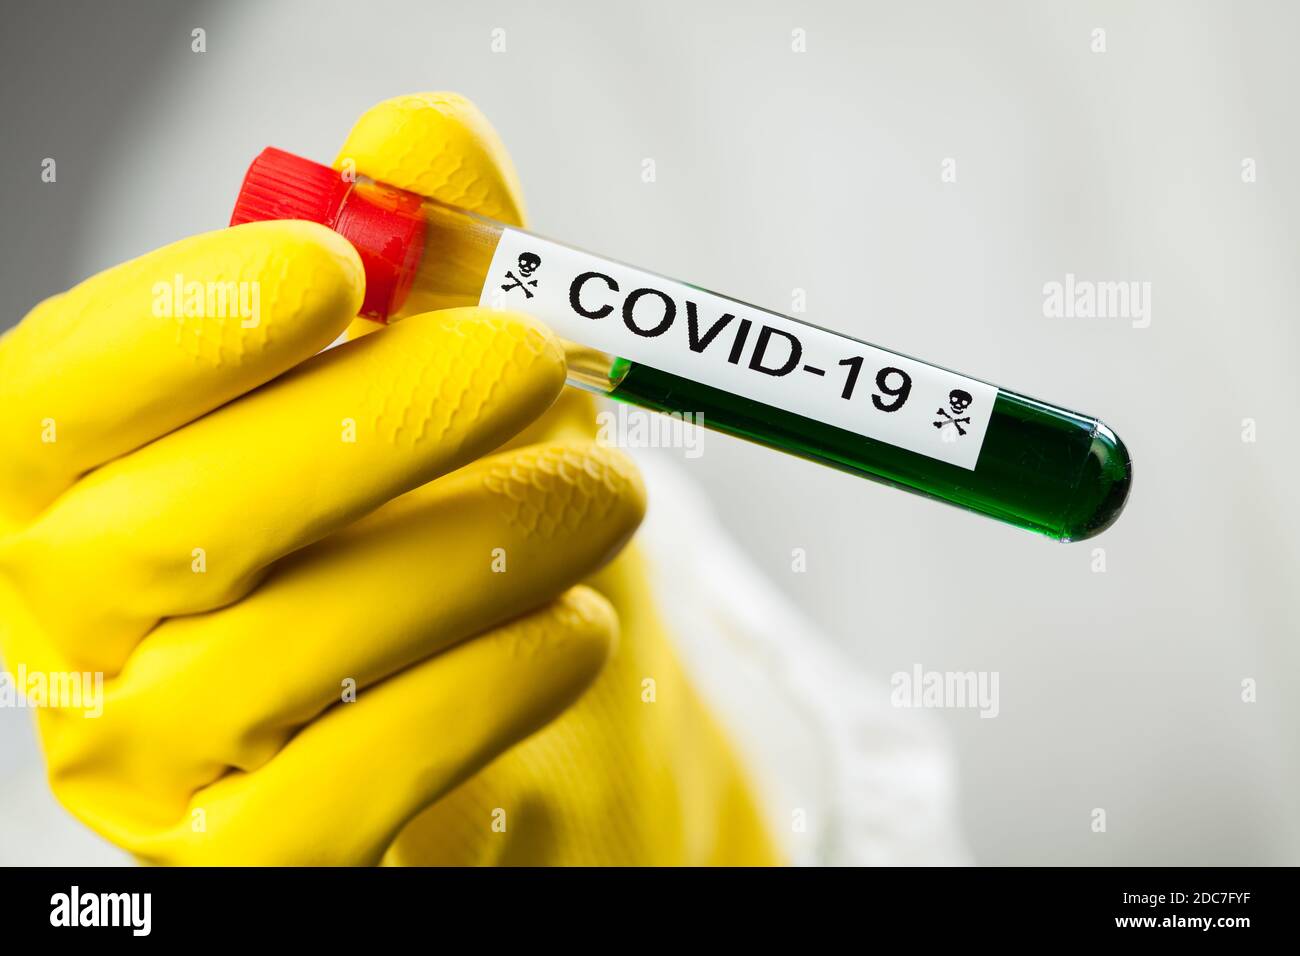 Lab scientist or medical technologist holding test tube with Coronavirus COVID-19 toxic green liquid, science fiction illustration of deadly corona Stock Photo